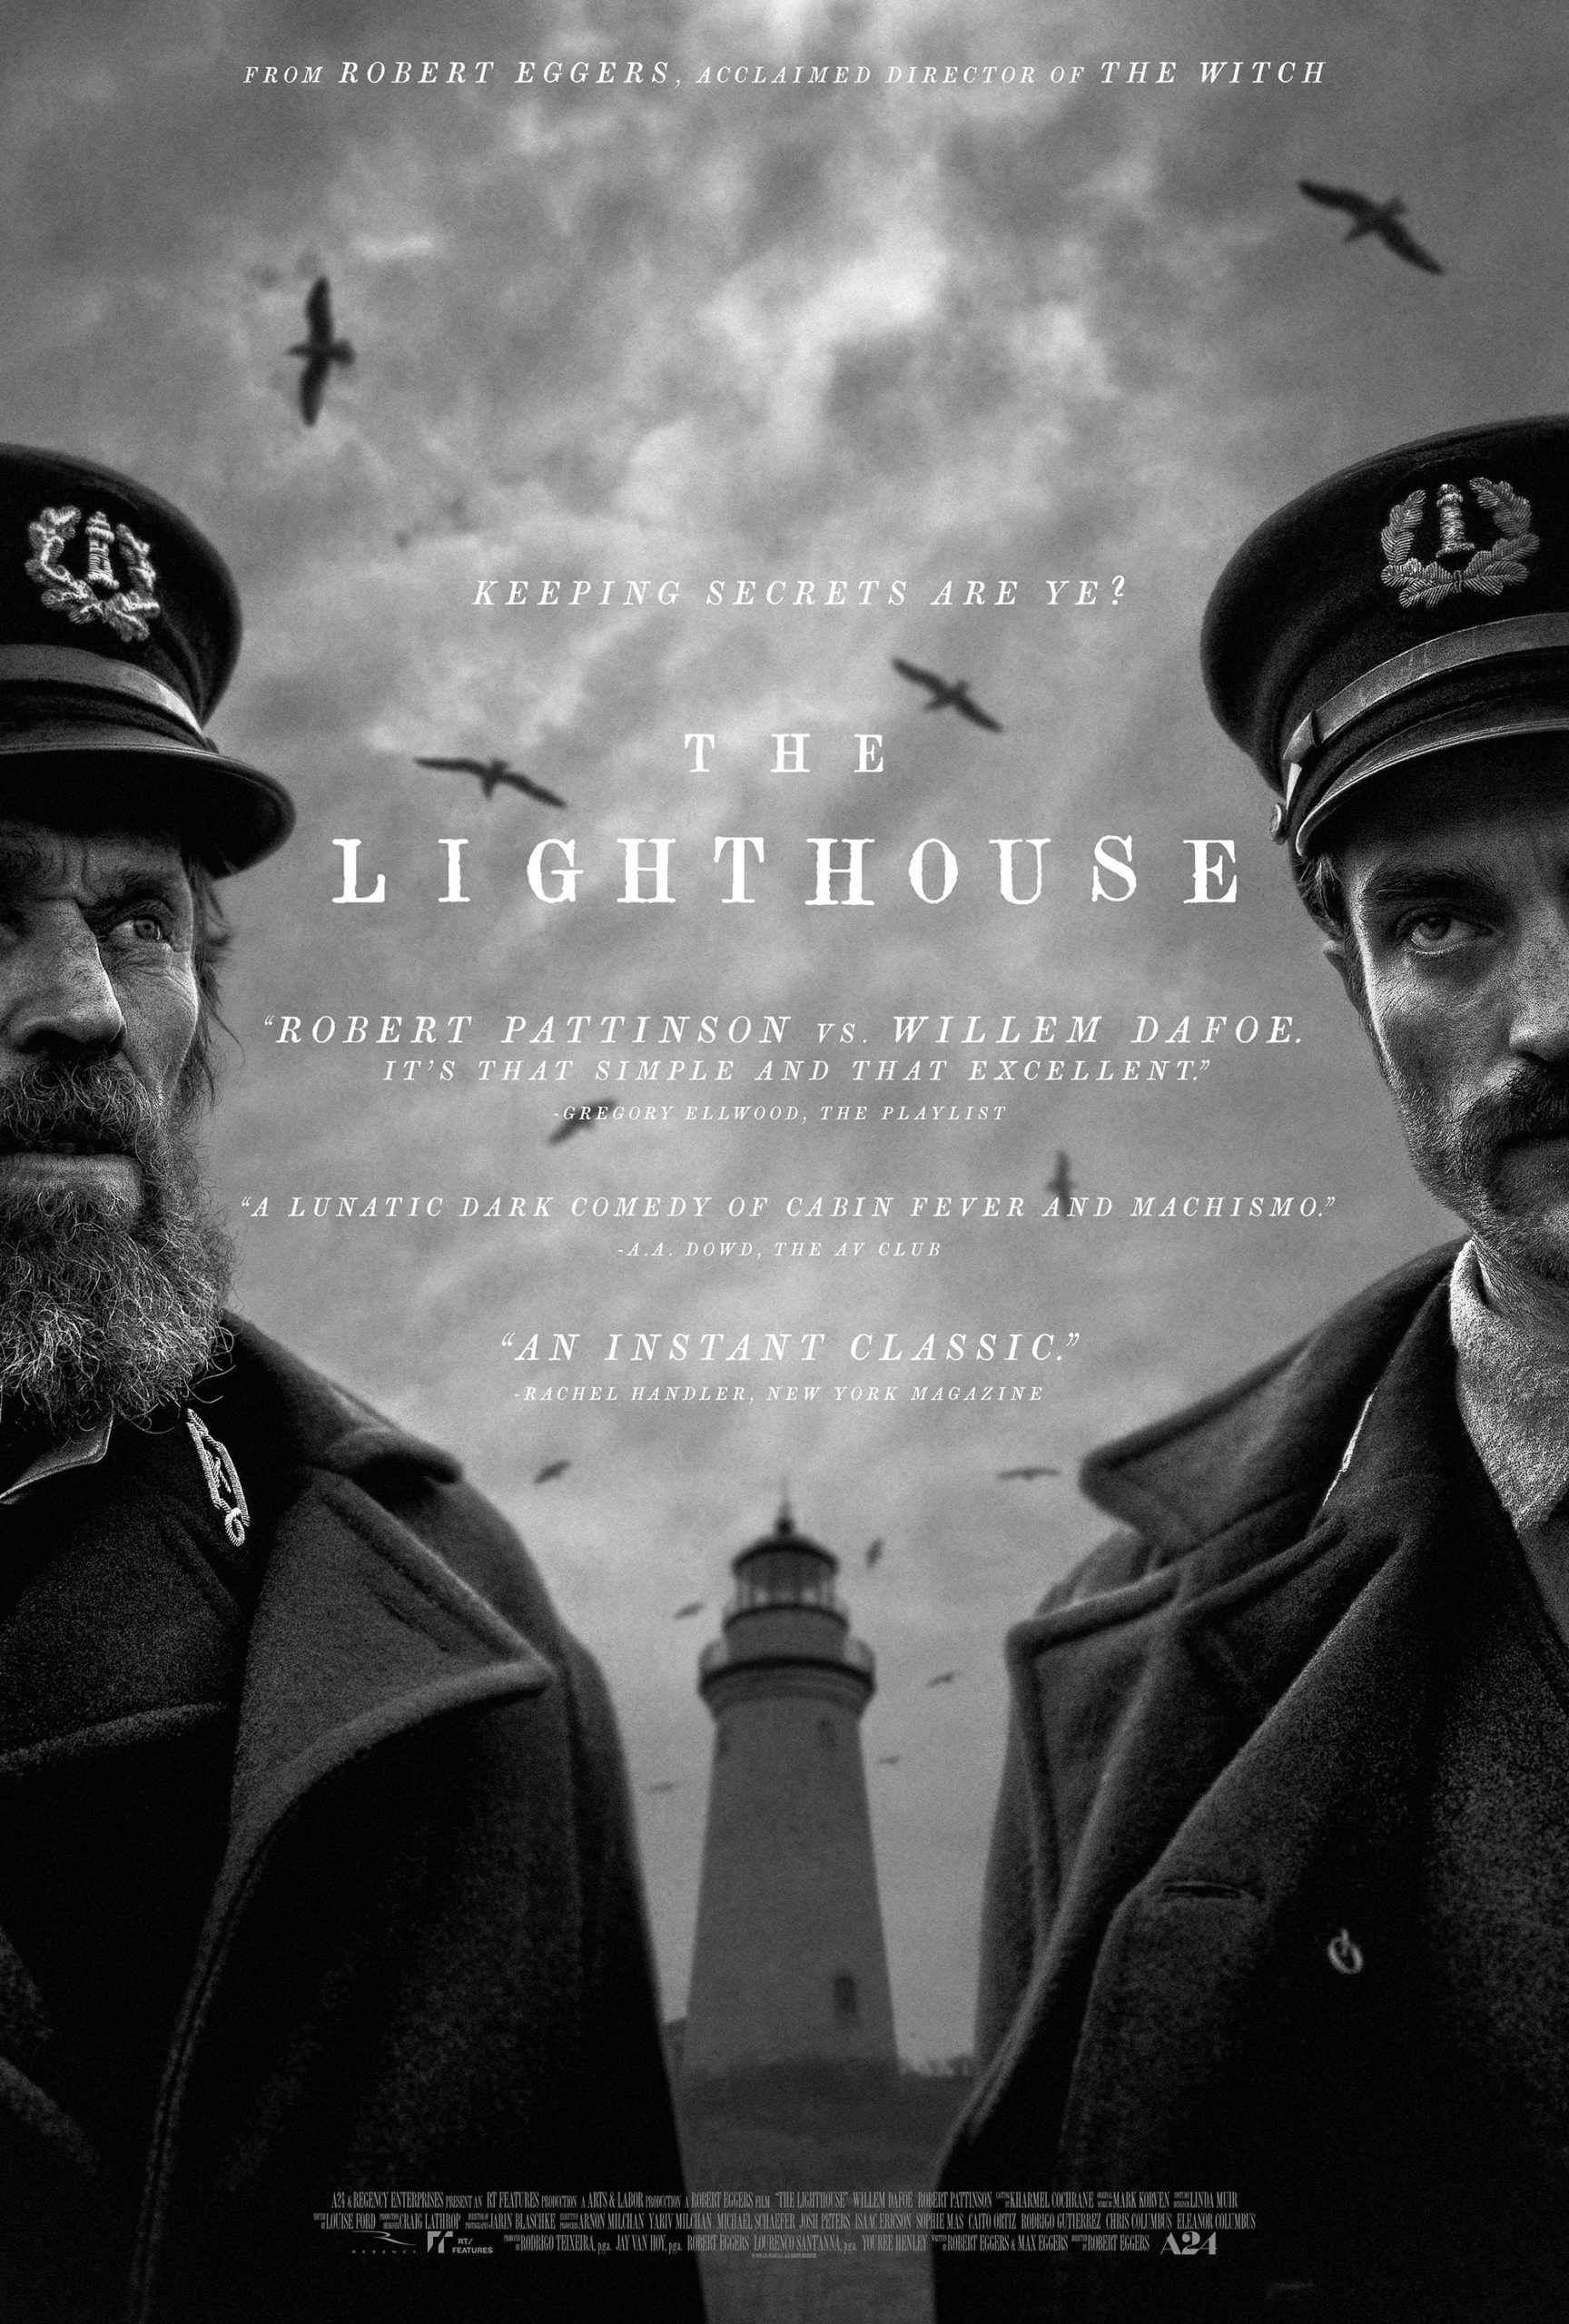 Image of the movie poster for "The Lighthouse," showing Thomas and Ephraim, played by Willam Defoe and Robert Pattinson respectively, stand before the lighthouse, with the title and credits centered.